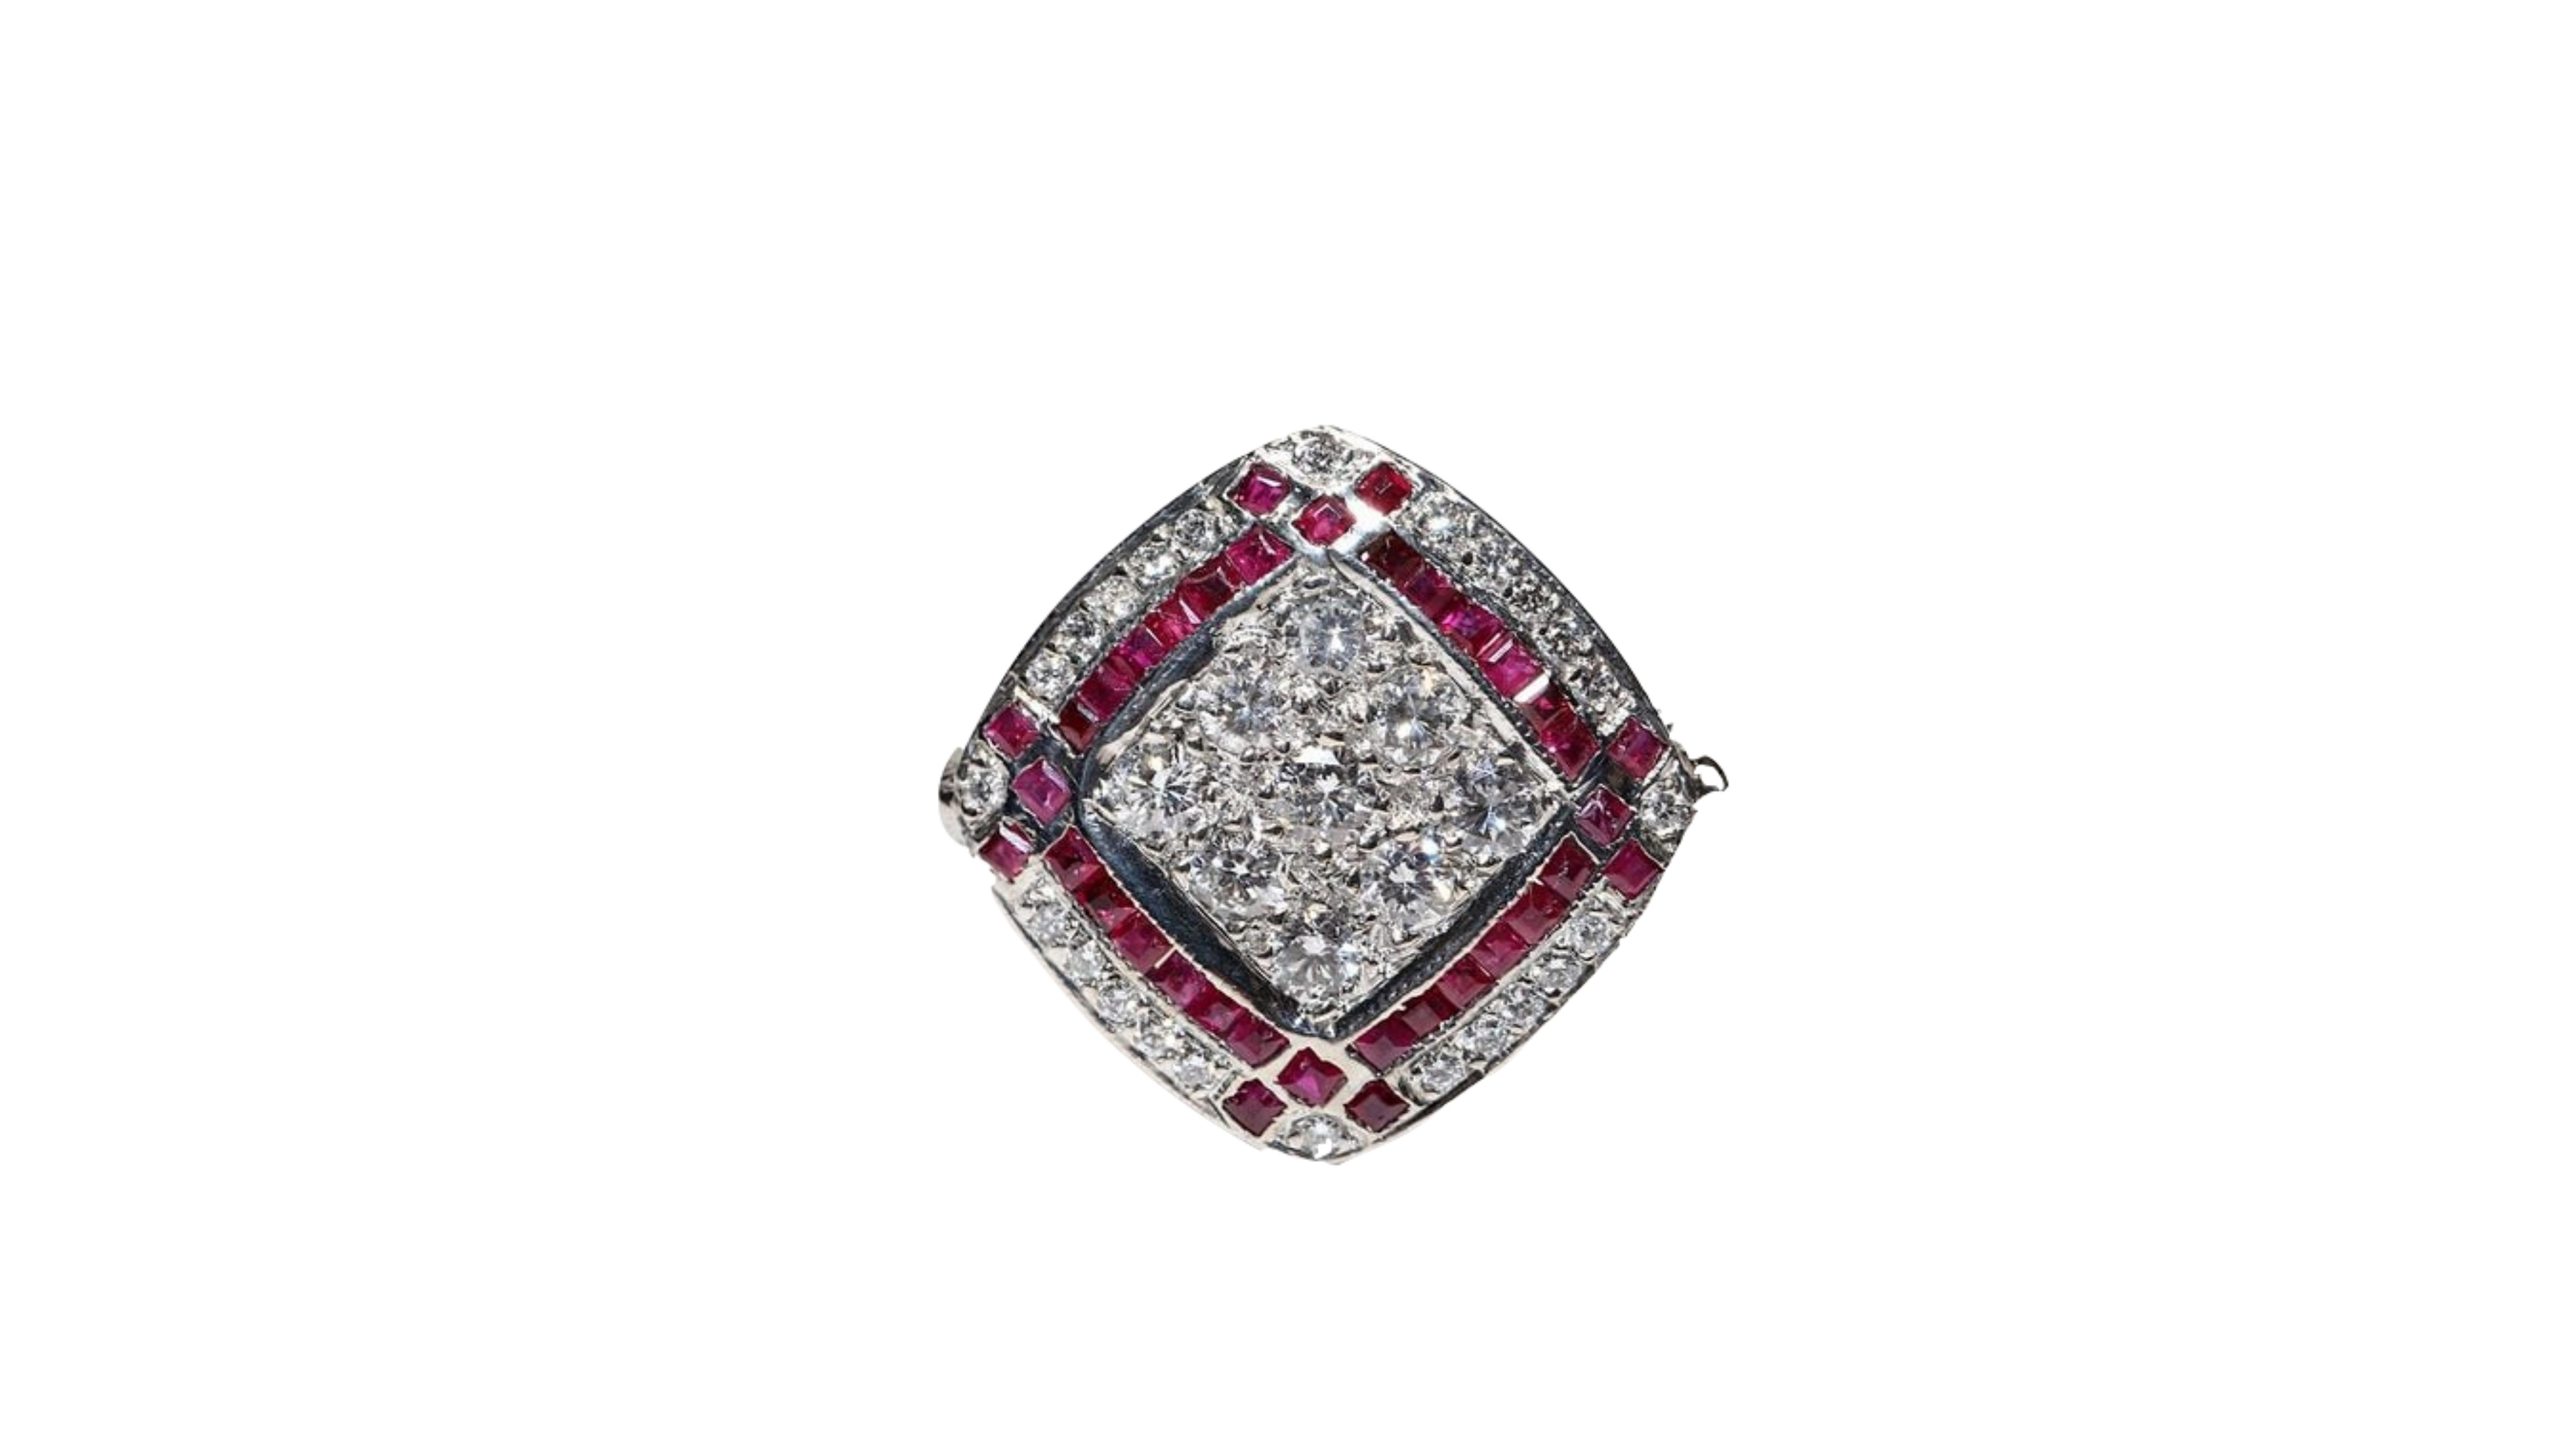 
This Original Art Deco Ruby Ring with 34 White Diamonds and 42 Ruby Stones.  Really does stand out in this design.  

Rubies are often said to symbolise power and protection. The bible associates them with beauty and wisdom. According to ancient